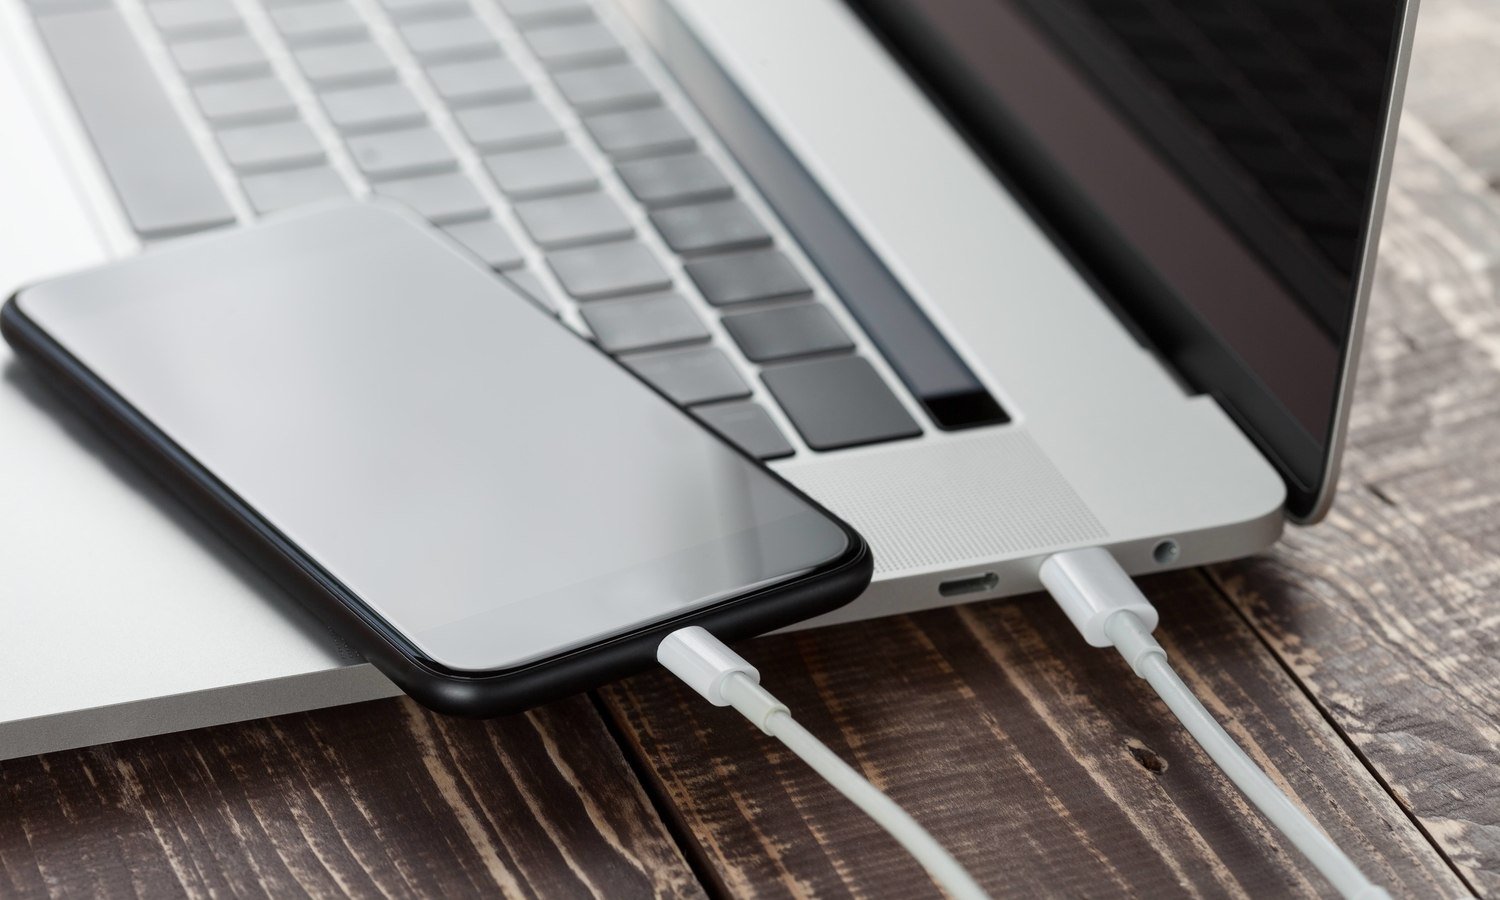 connect iphone to chromebook using a usb cable